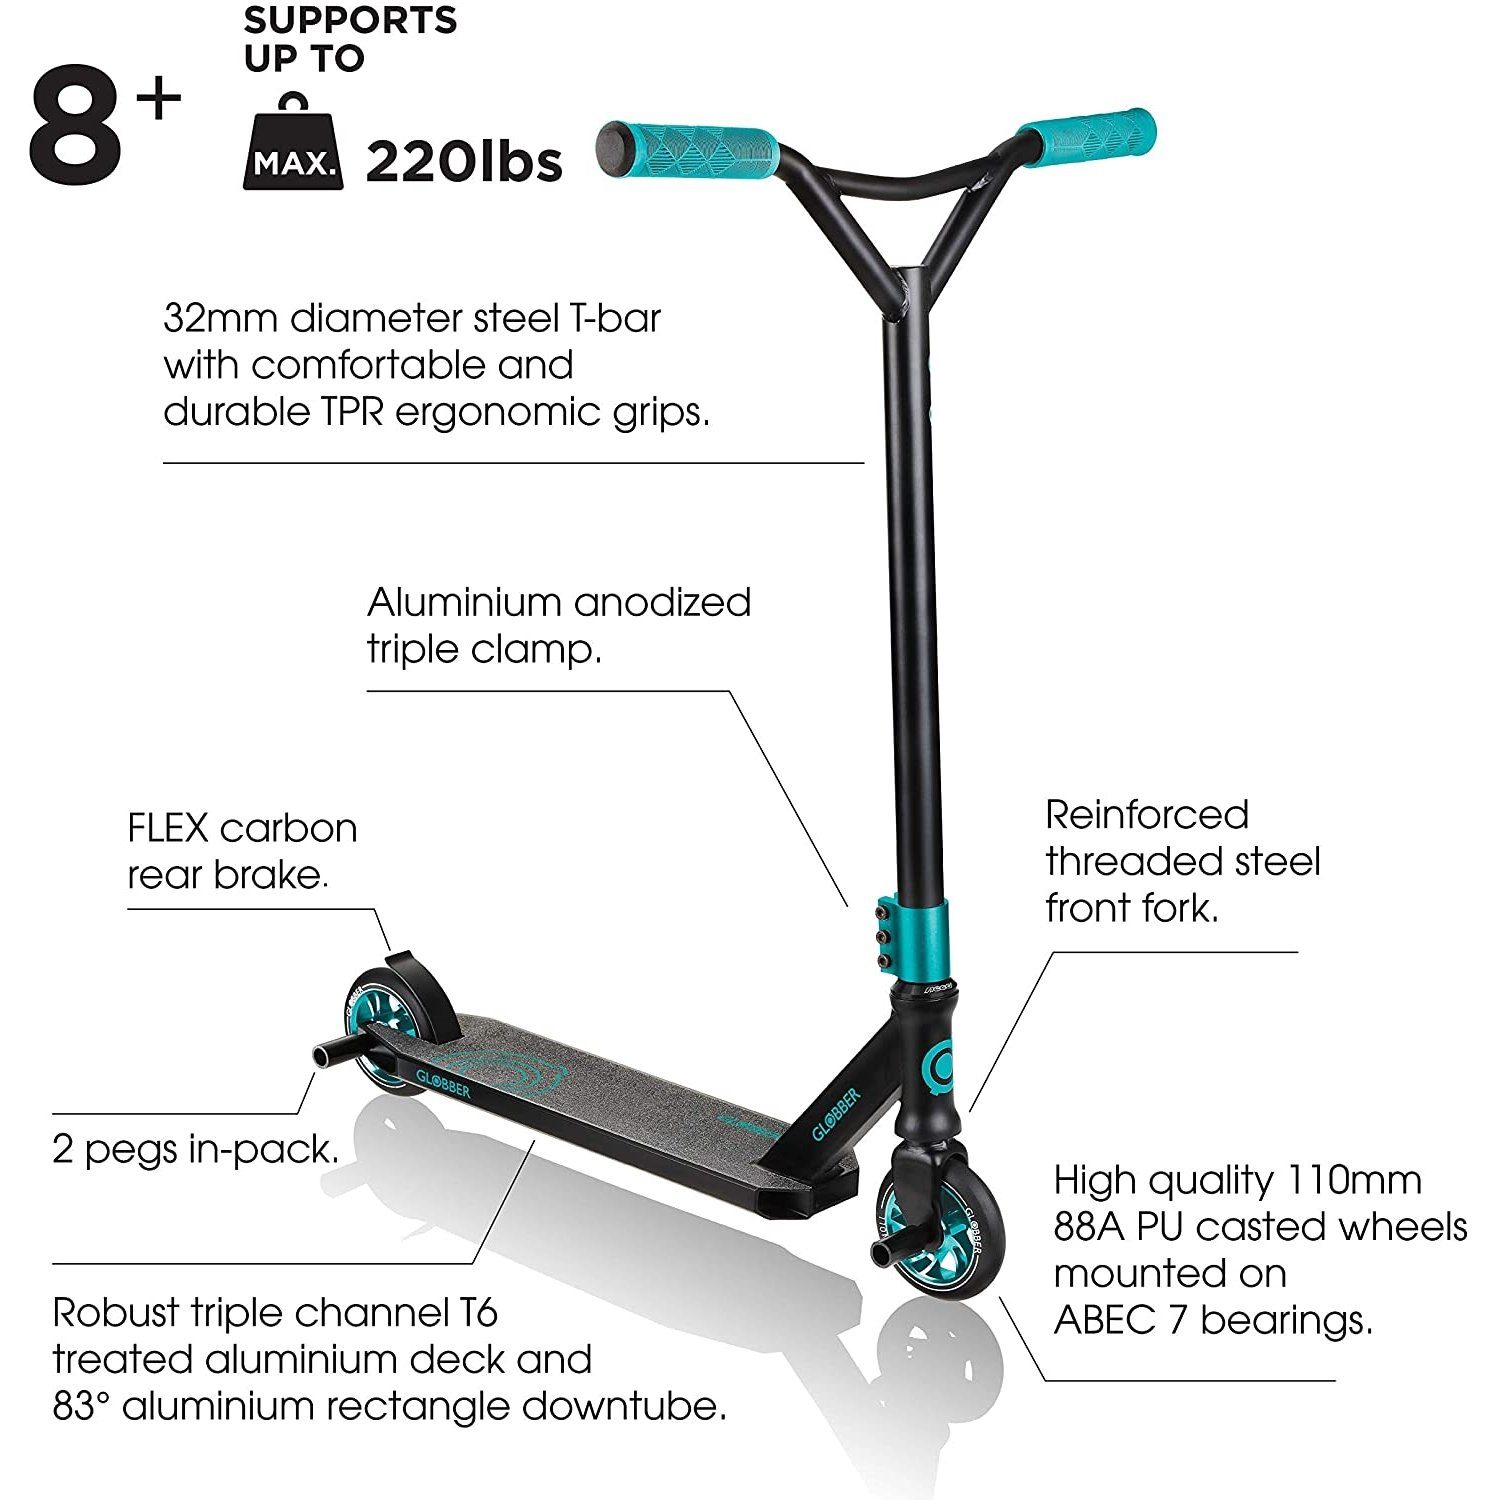 624-009-2 toys Scooter 720 GS & Stuntscooter Globber sports authentic schwarz-teal Türkis